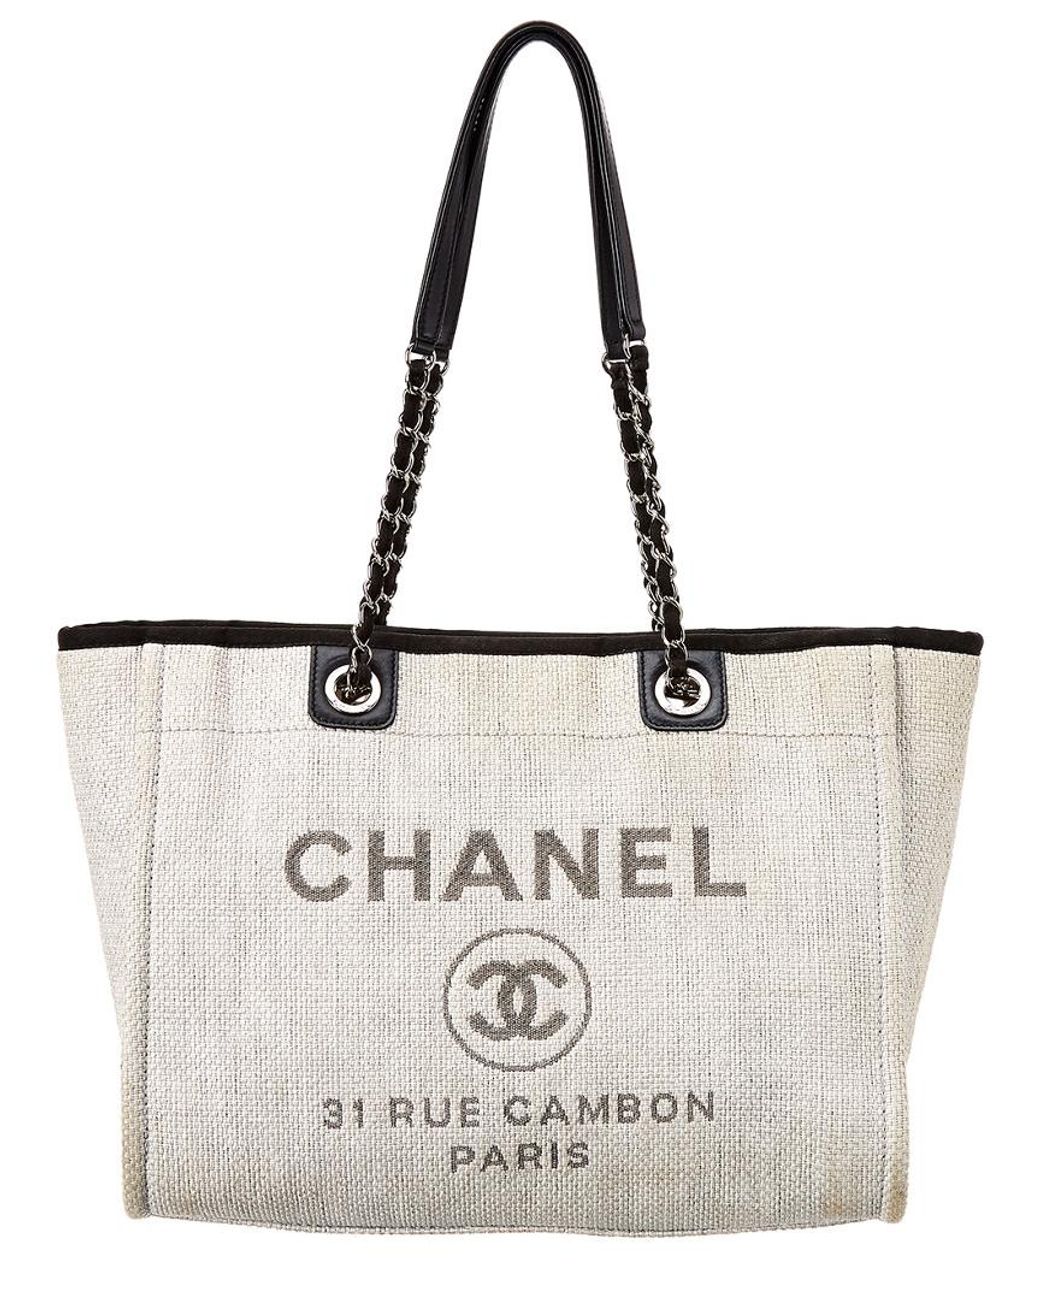 Chanel Light Grey Canvas Large Deauville Tote in Grey | Lyst Australia